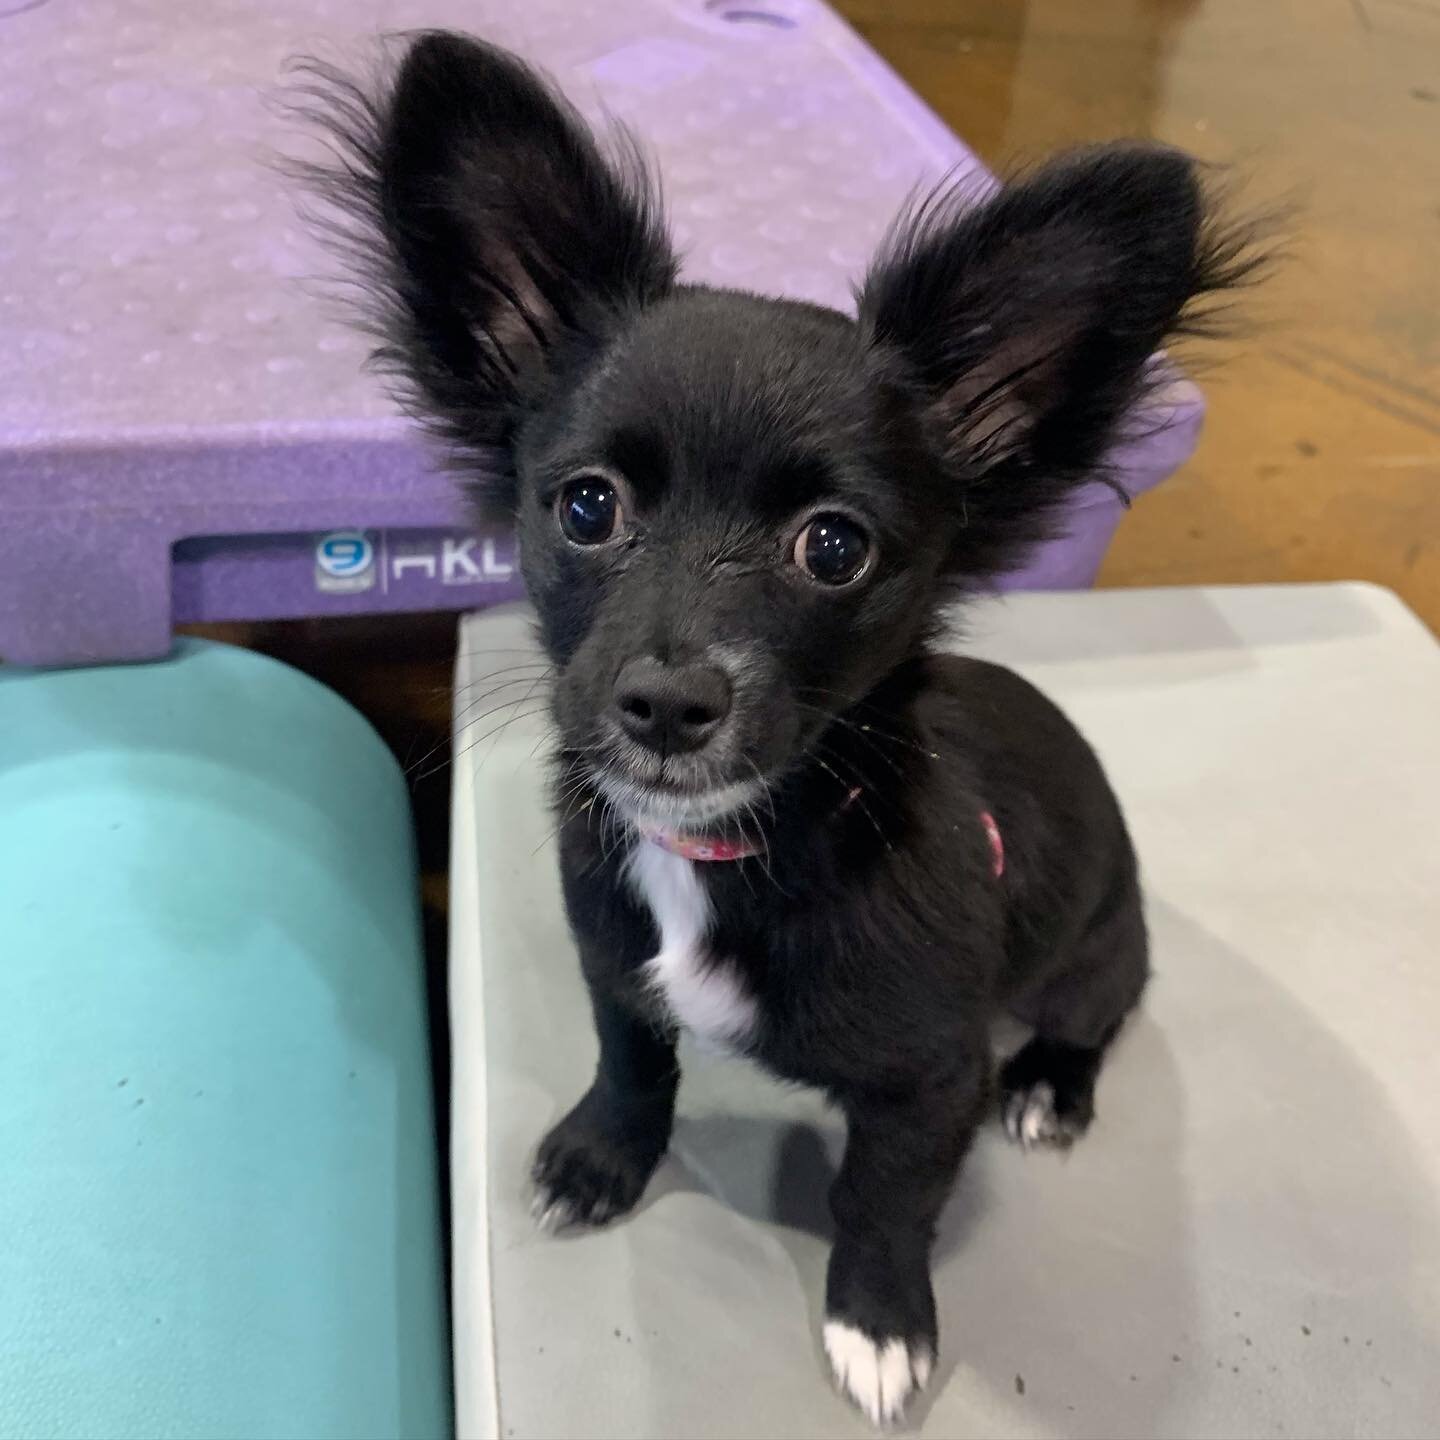 Student Spotlight: Rosie 😍🐶🤩. Rosie felt the slightest bit shy when she arrived, but the toys and trainers brought her out of her shell. She ended up playing with other puppies quite a bit and quickly took to the other new pup, Ludo. She likes pla